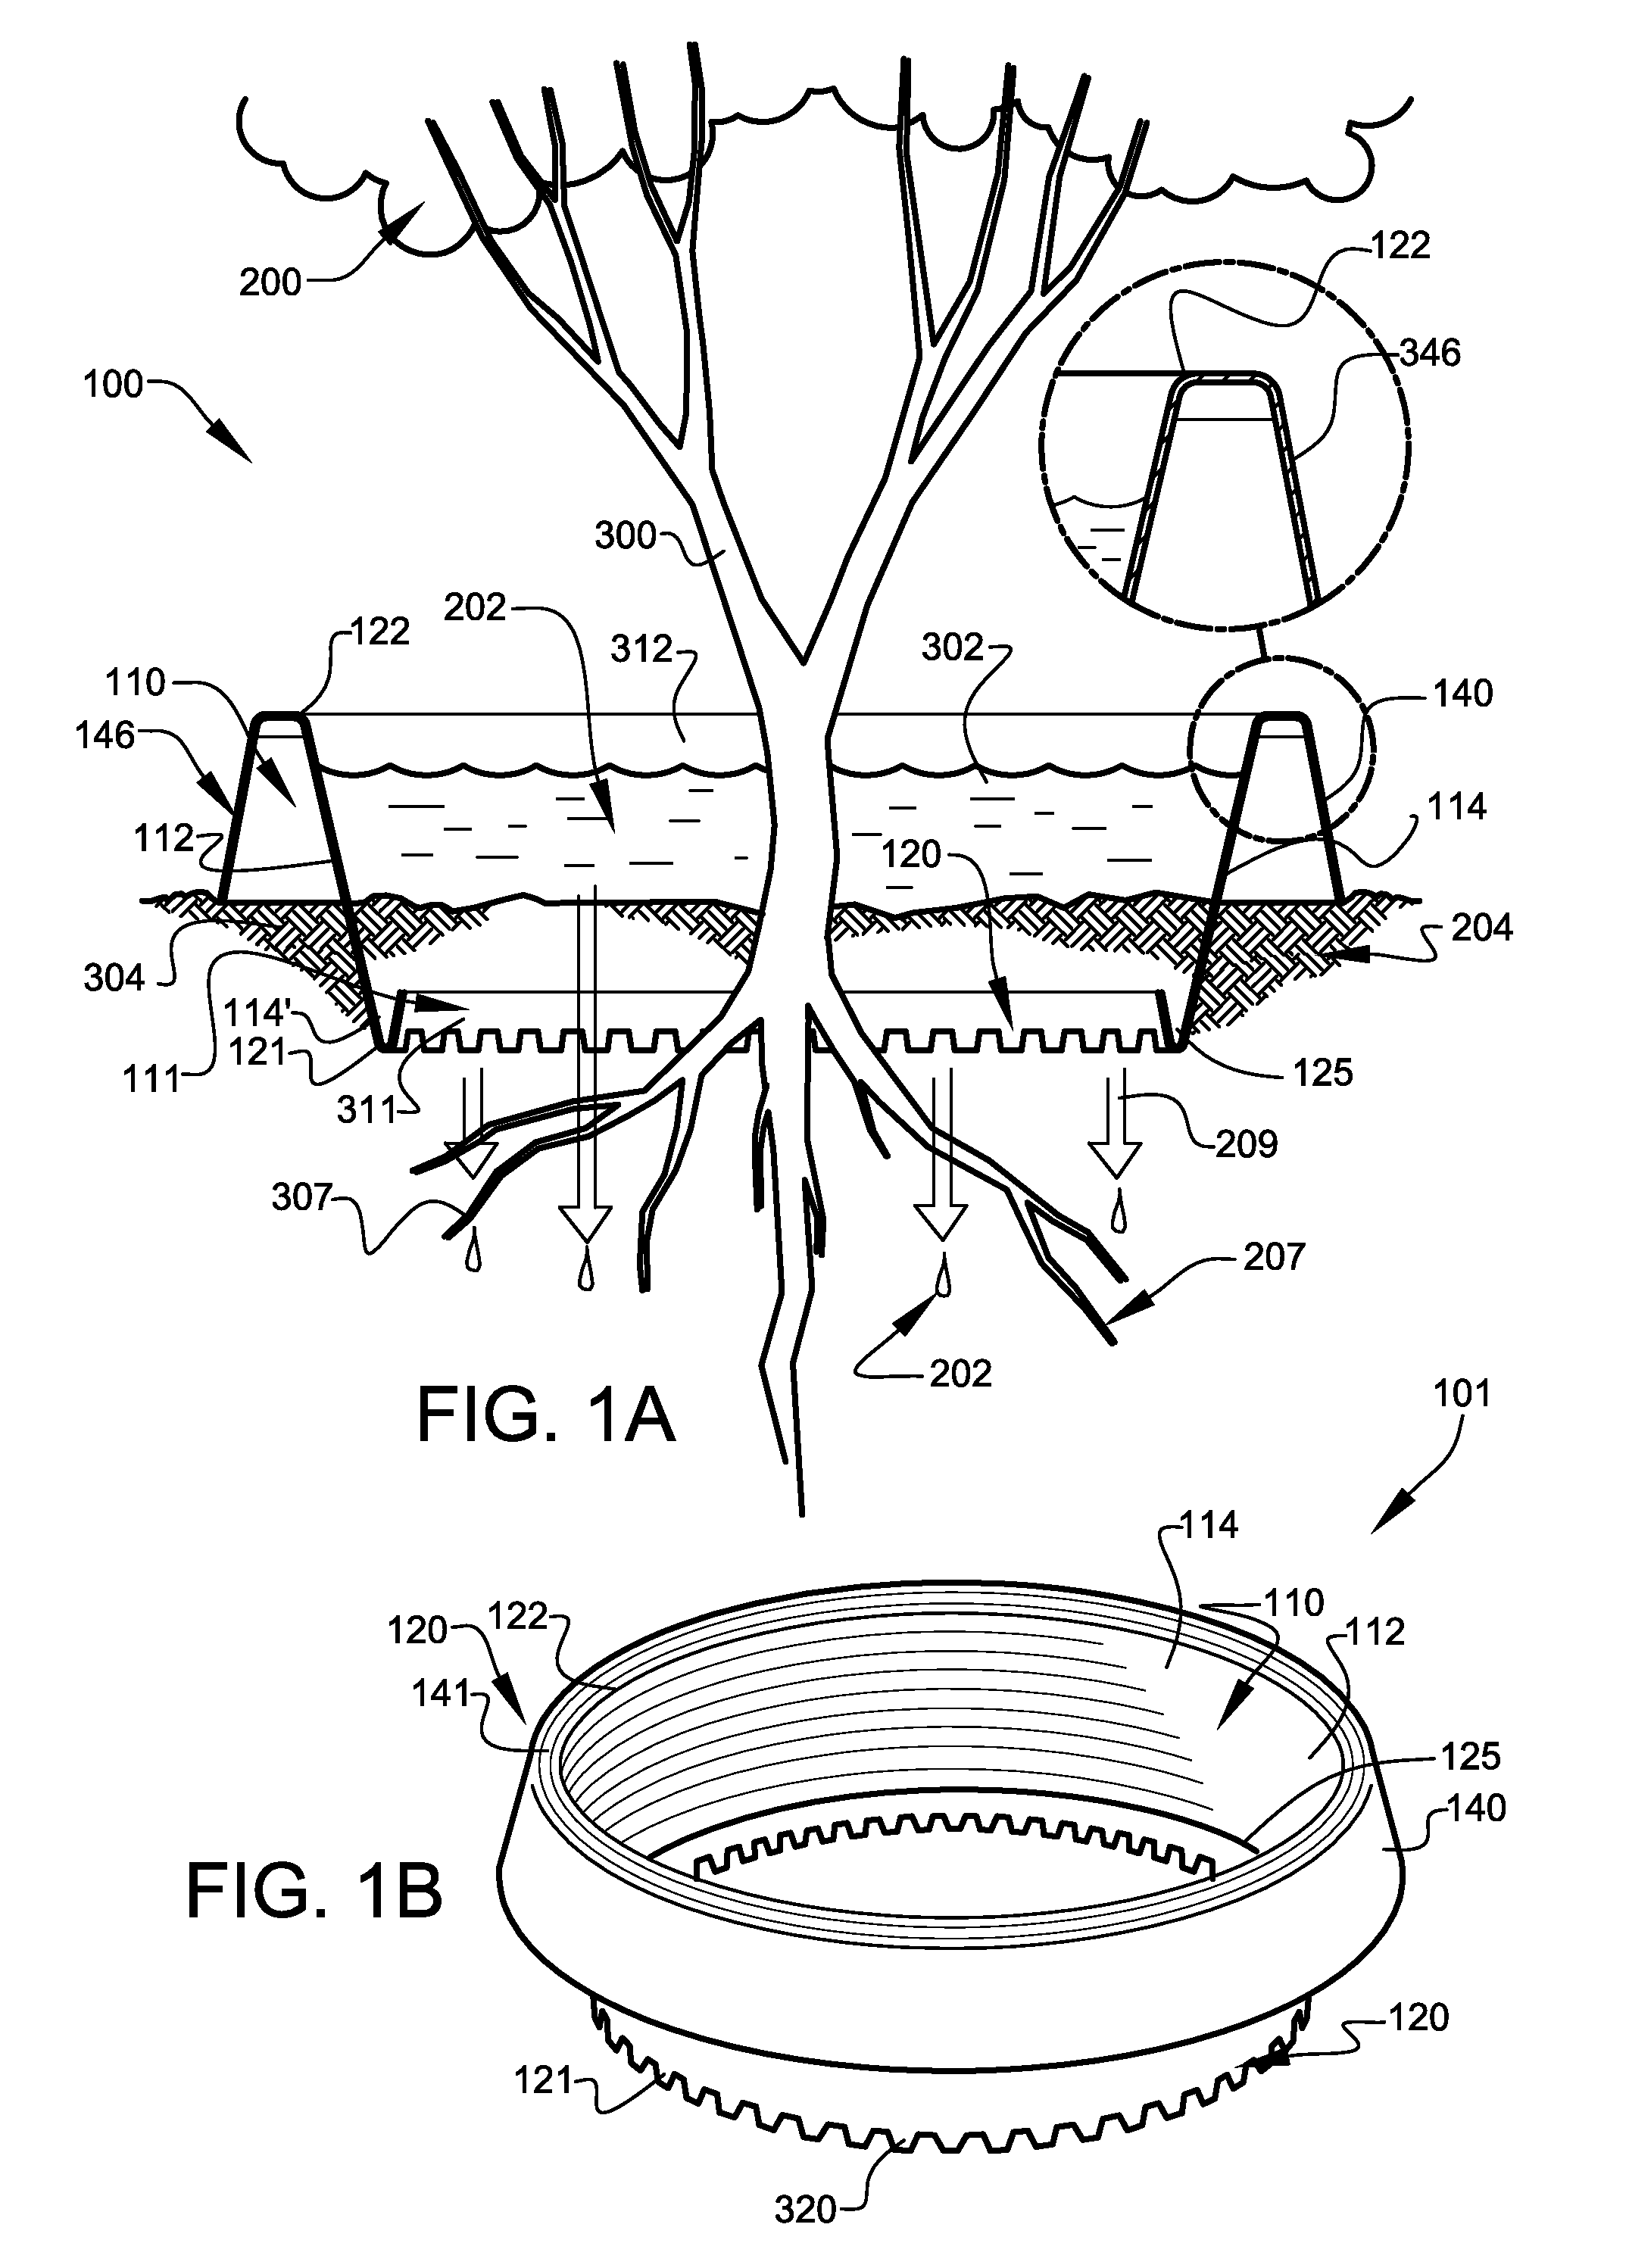 Tree and plant watering systems